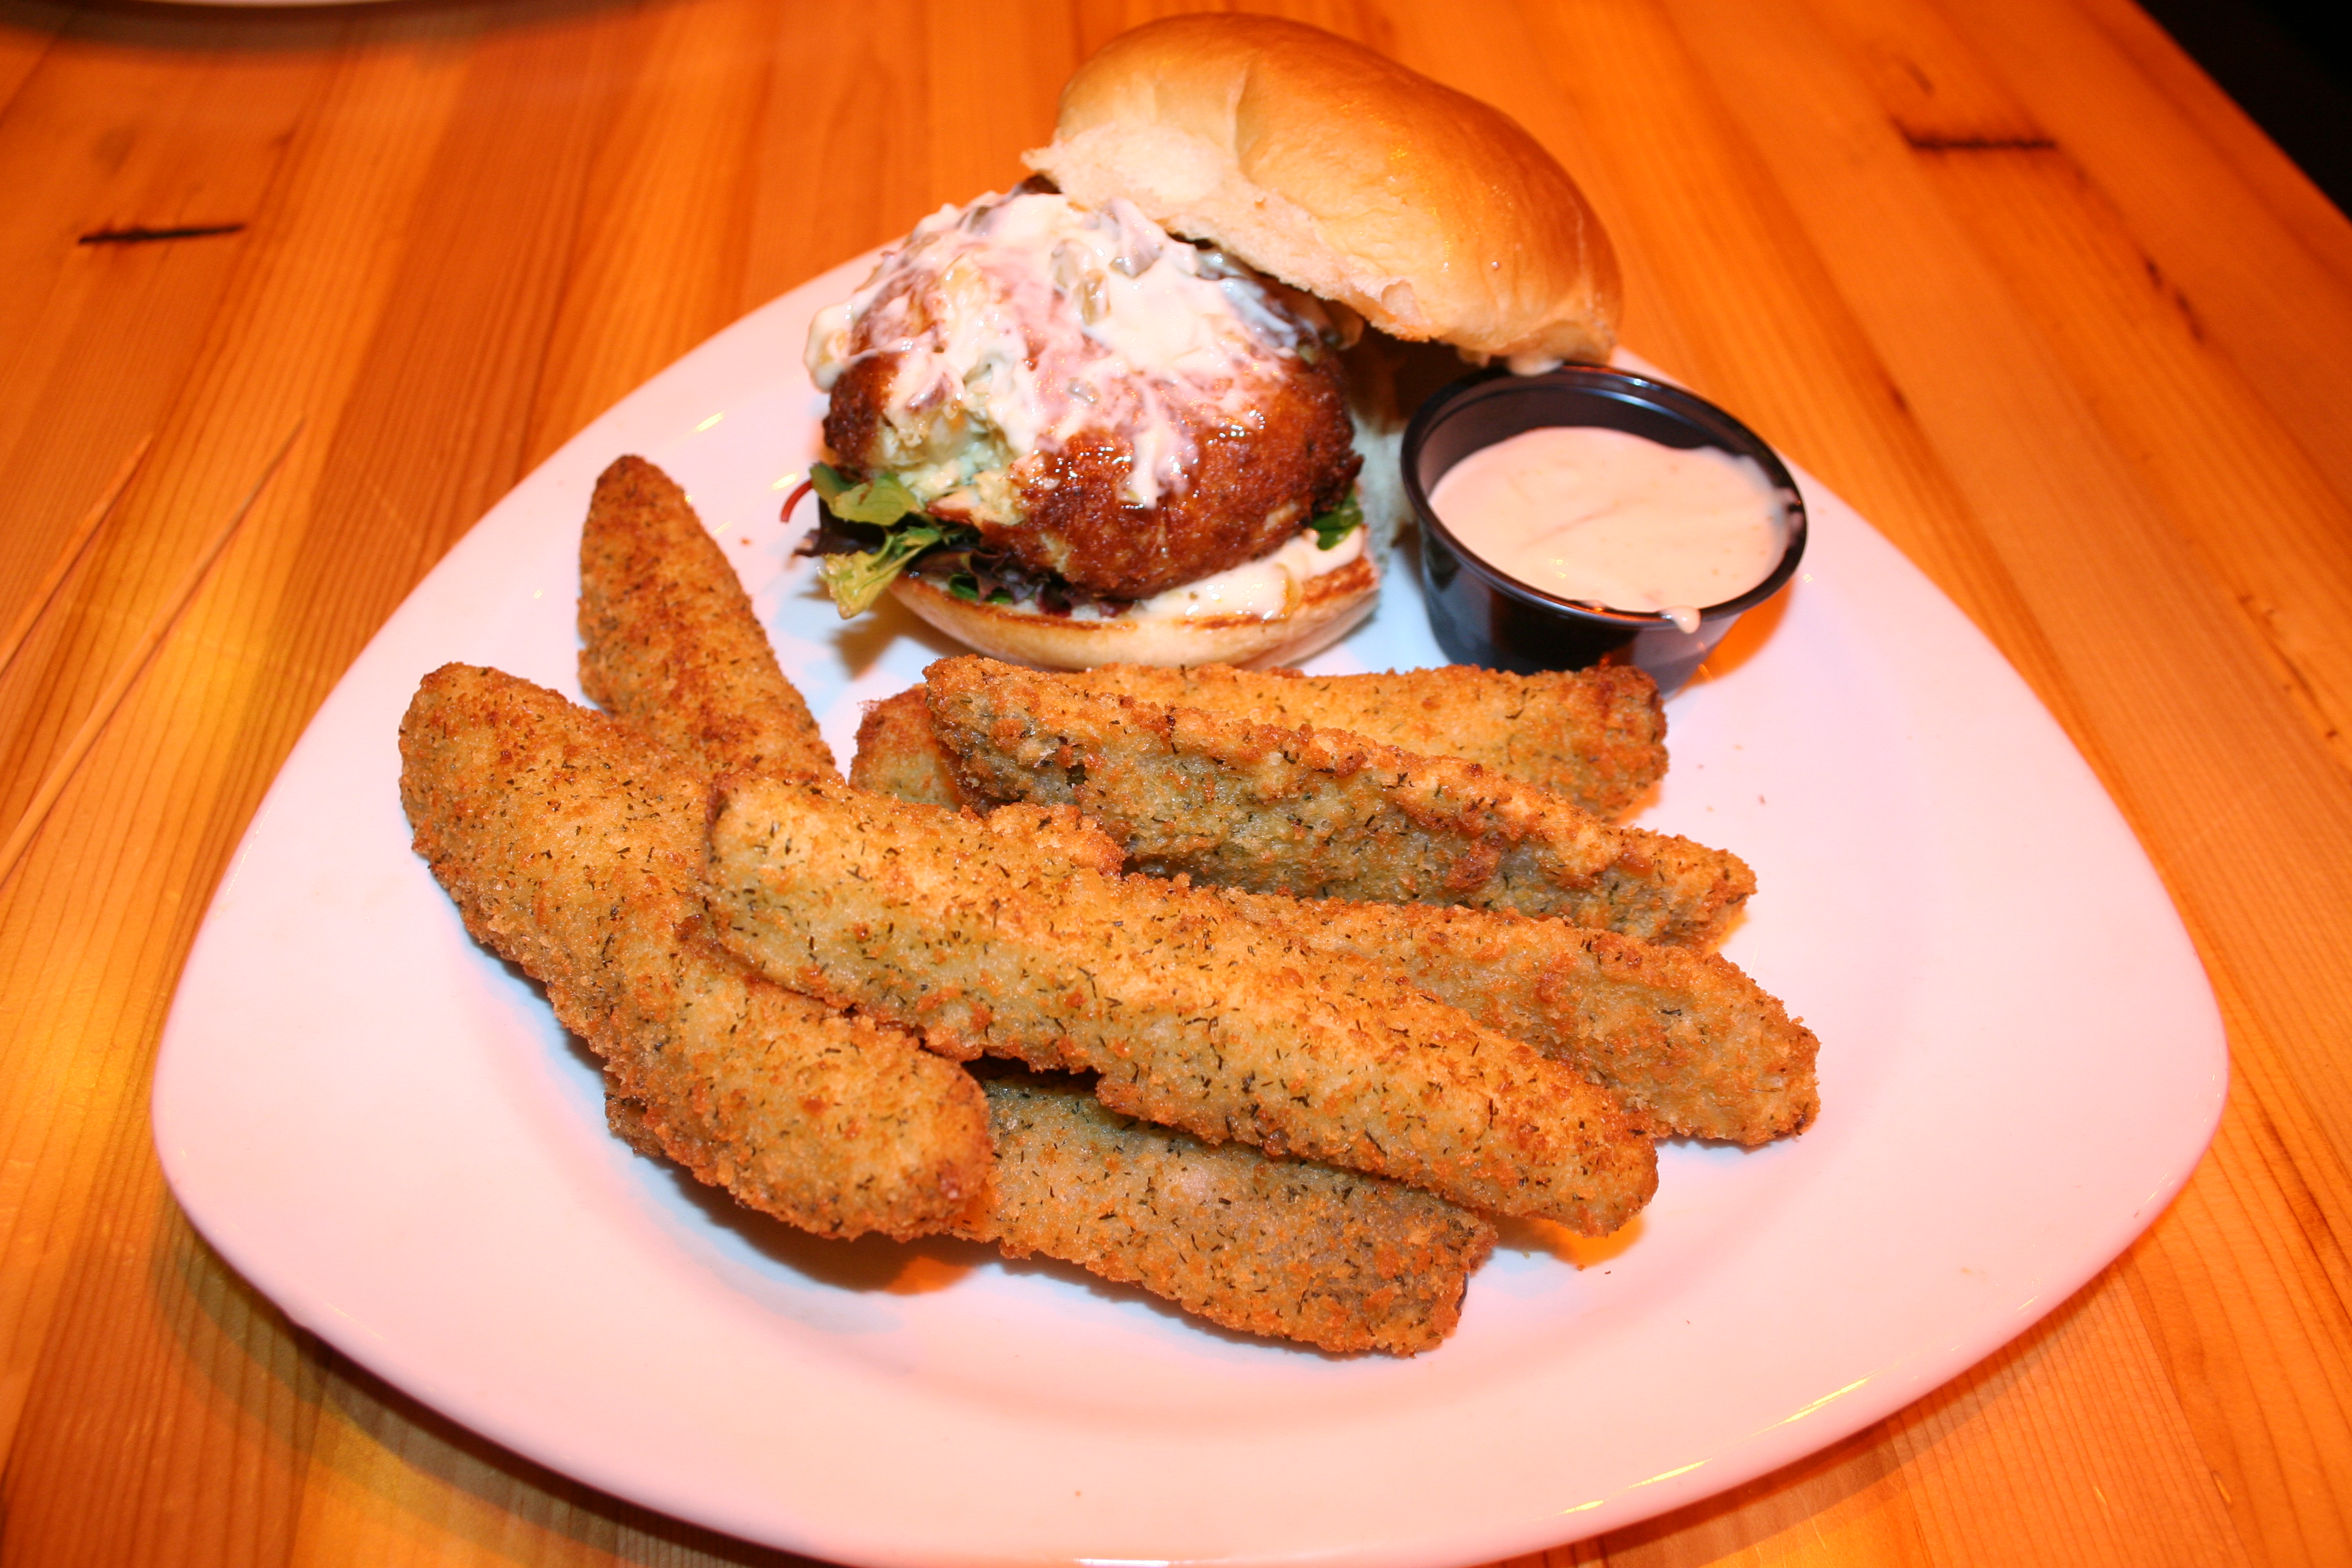 TKO Burger's crab cake sandwich with fried pickles and TKO sauce. (Photo: Mark Heckathorn/DC on Heels)